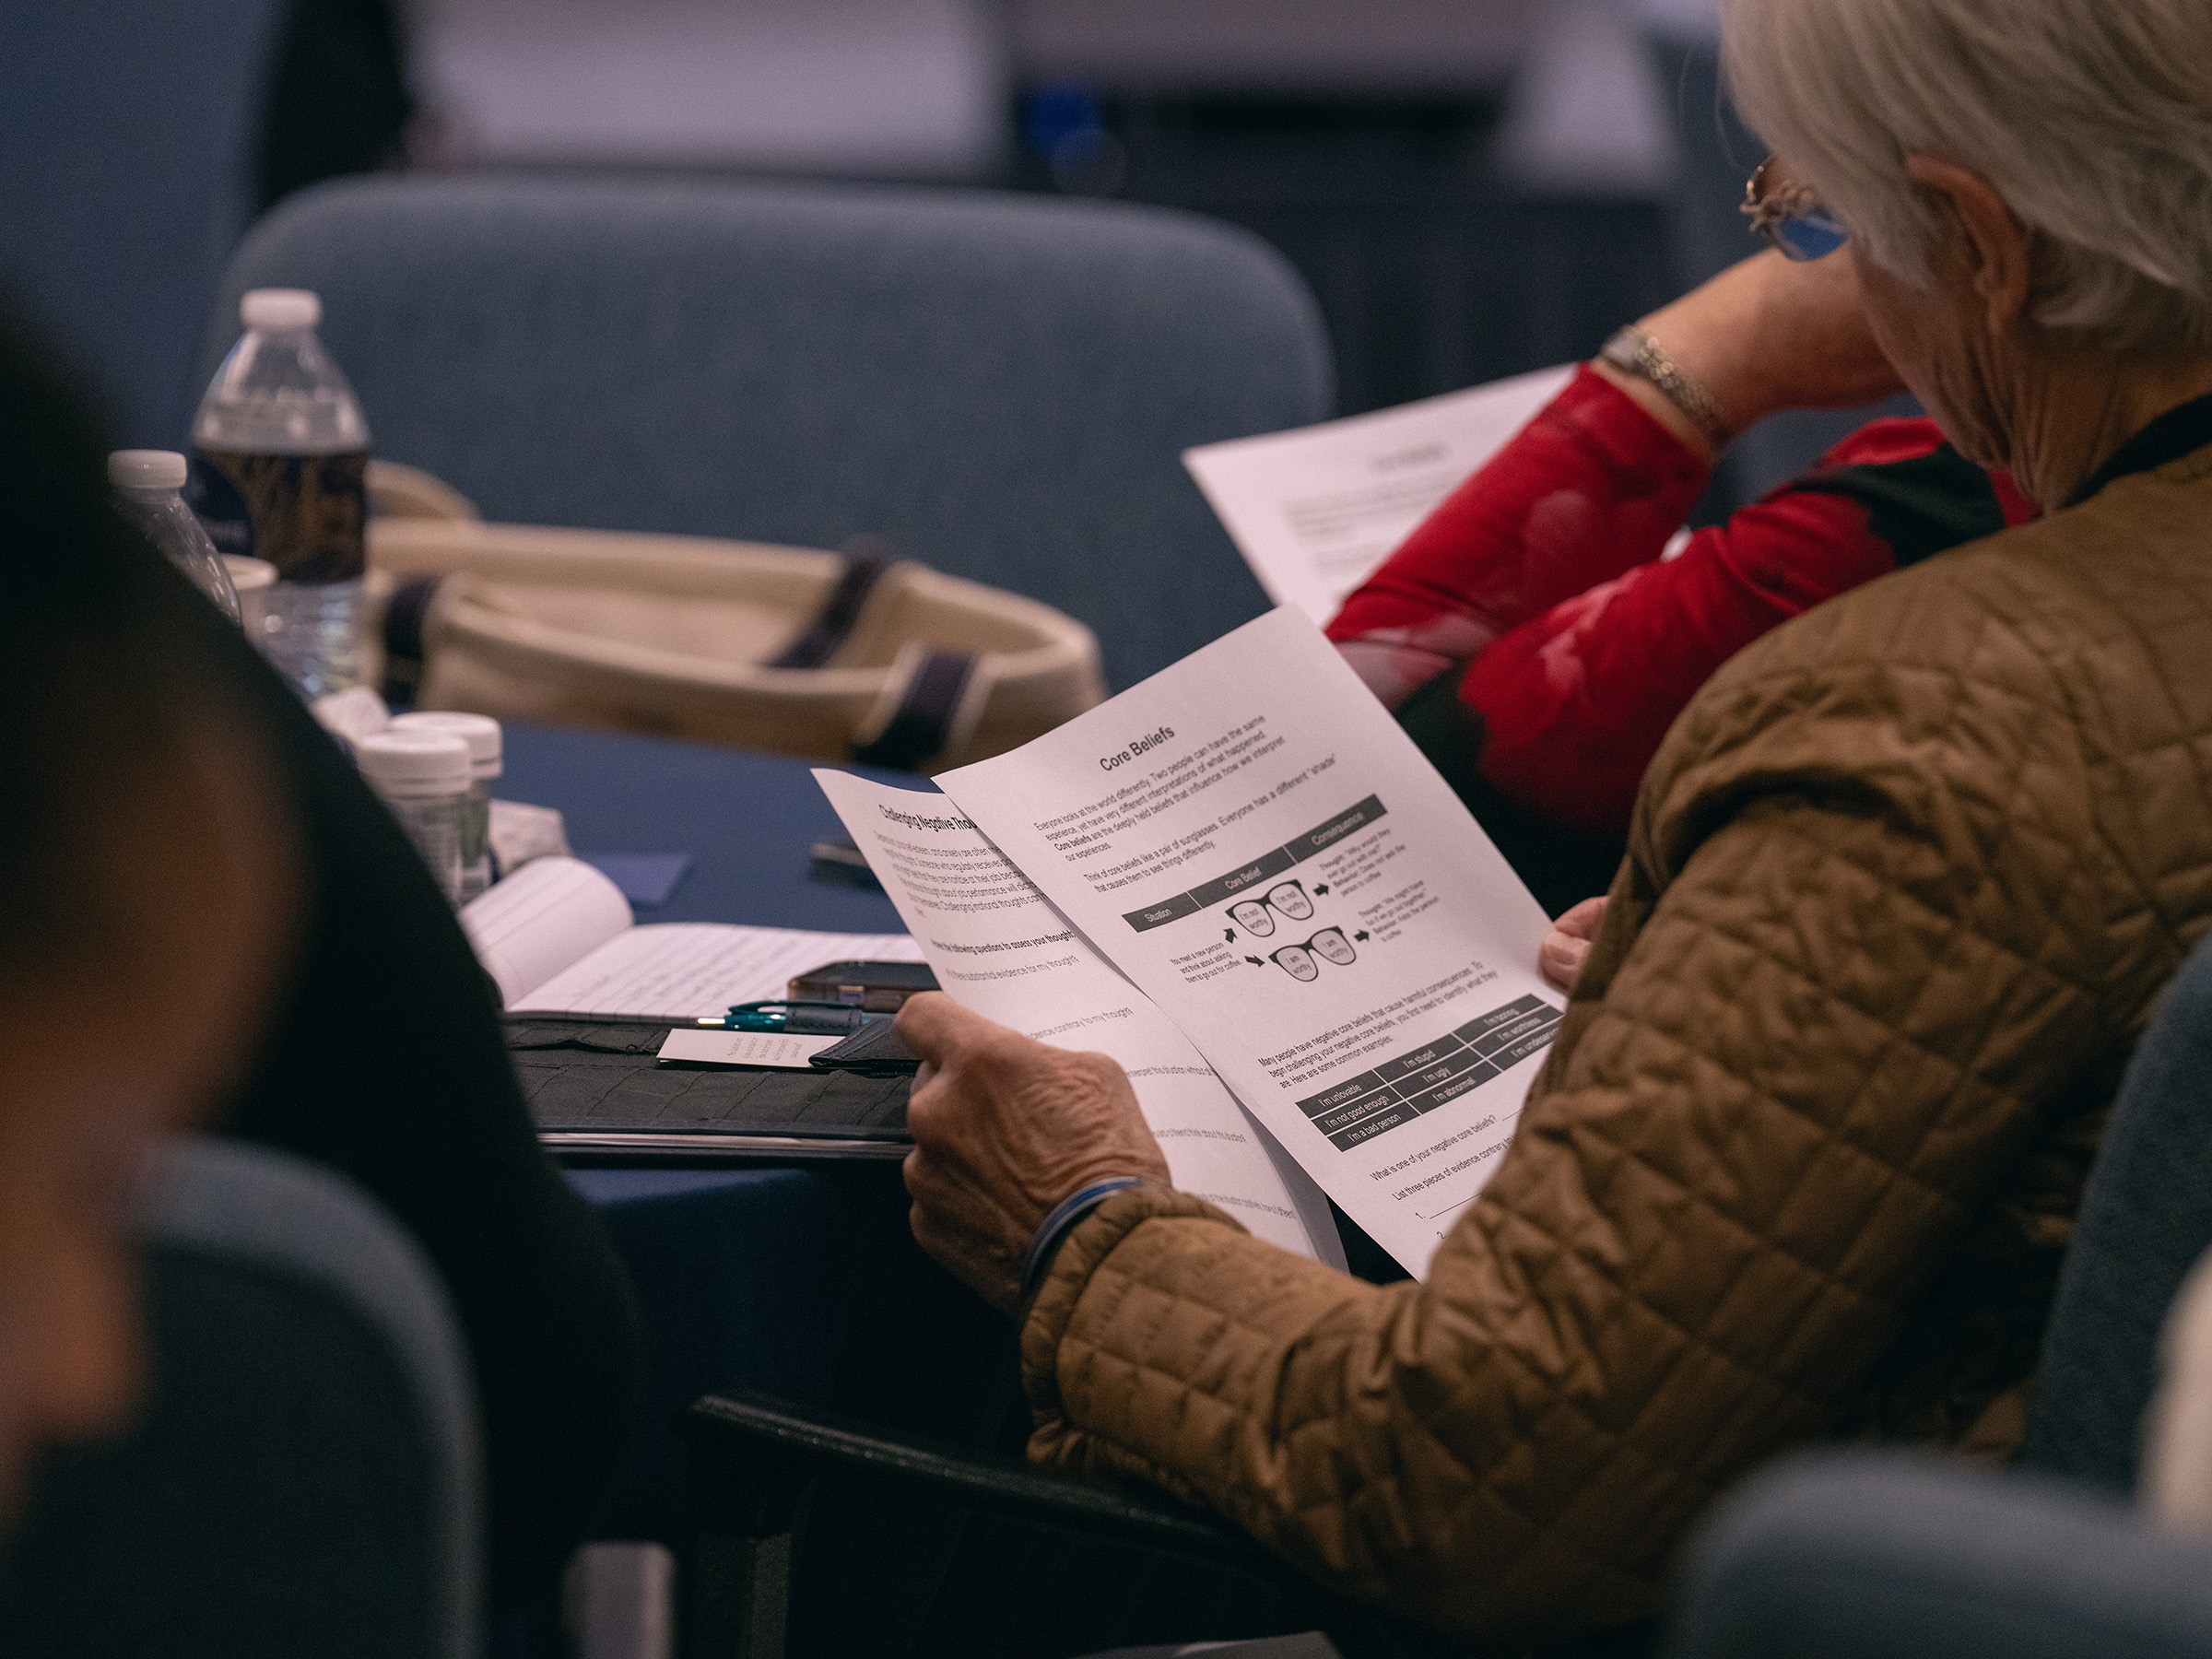 A woman sitting down at a conference table looks at papers reading core beliefs